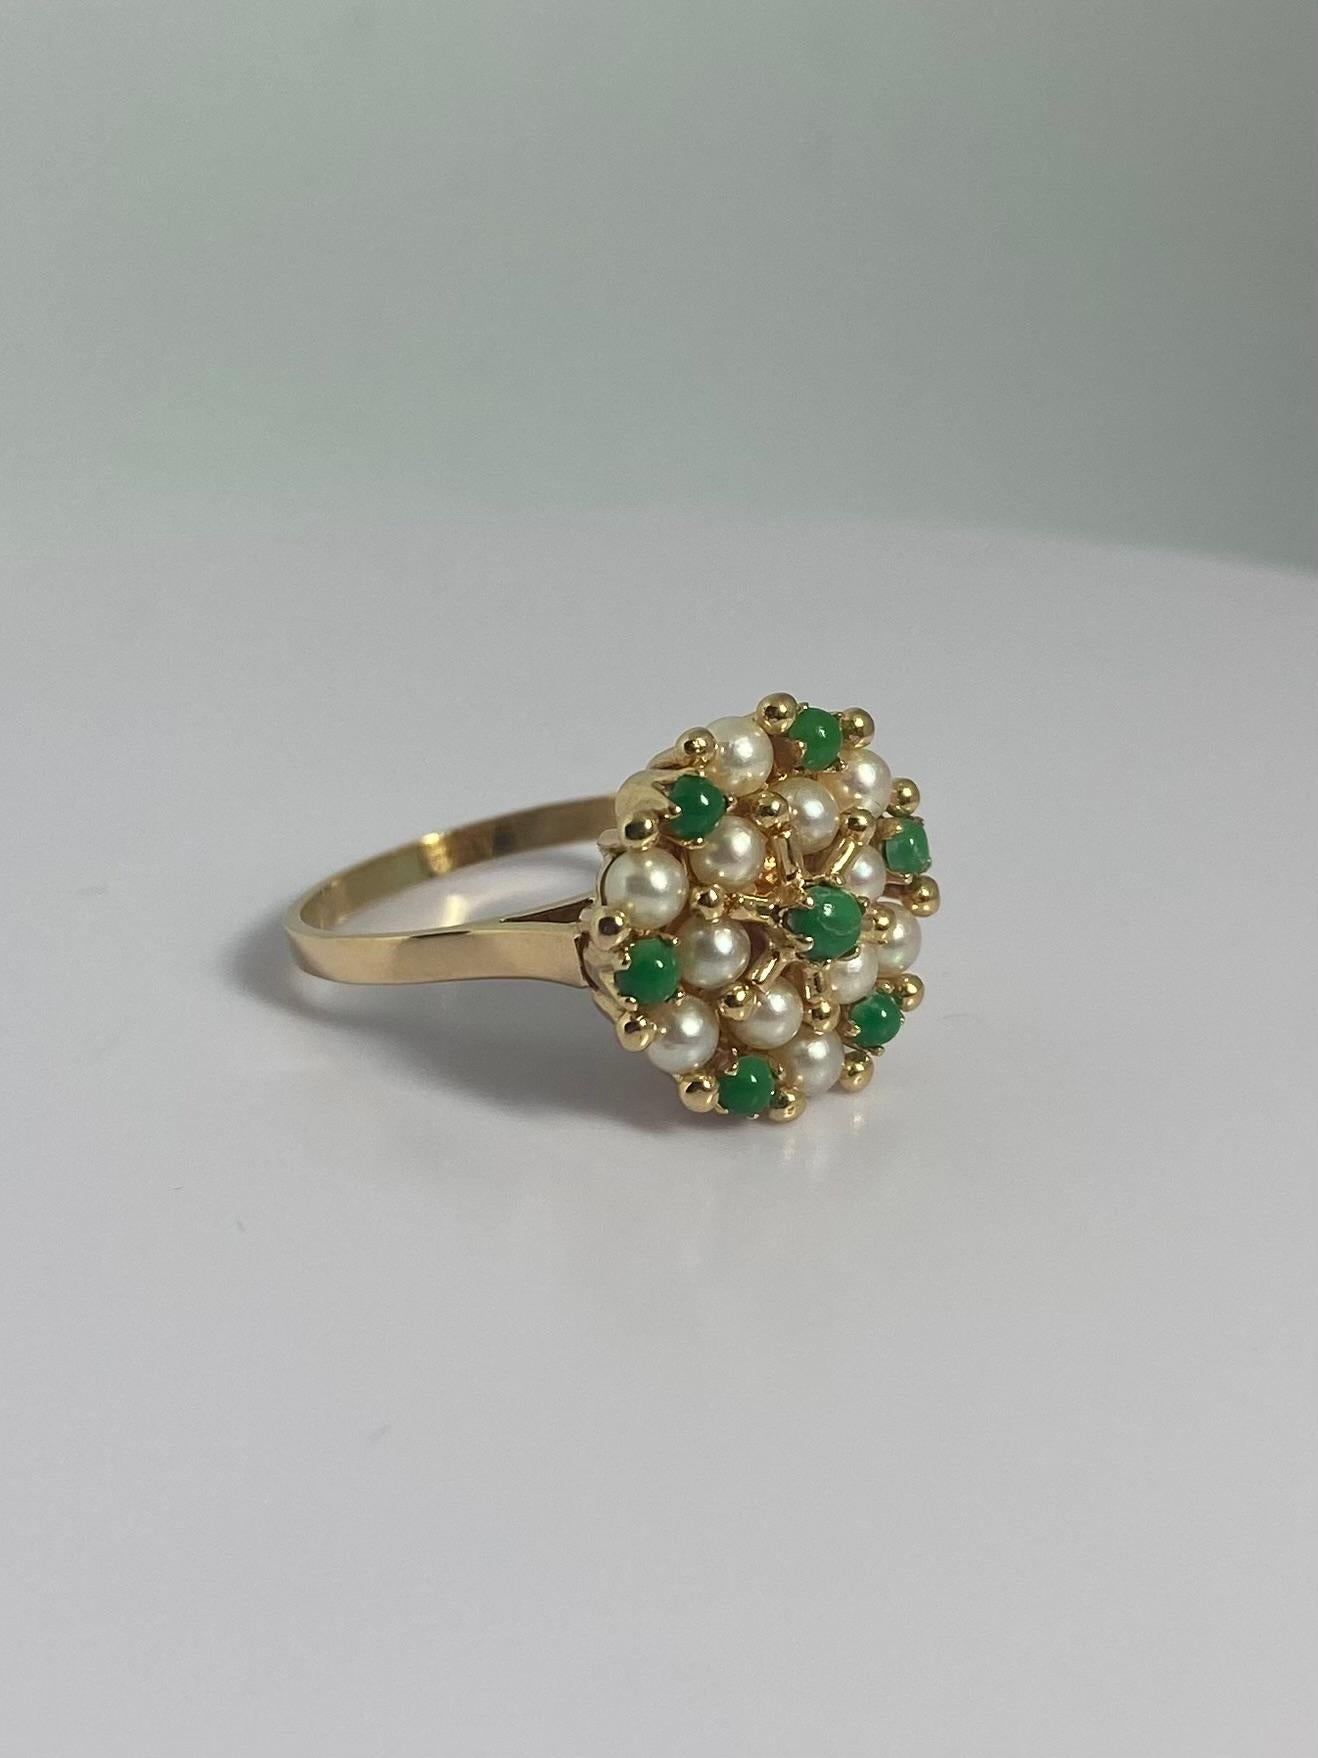 18 Carat Yellow Golden Cocktail Ring with Pearls and Jade Nephrites In Good Condition For Sale In Heemstede, NL